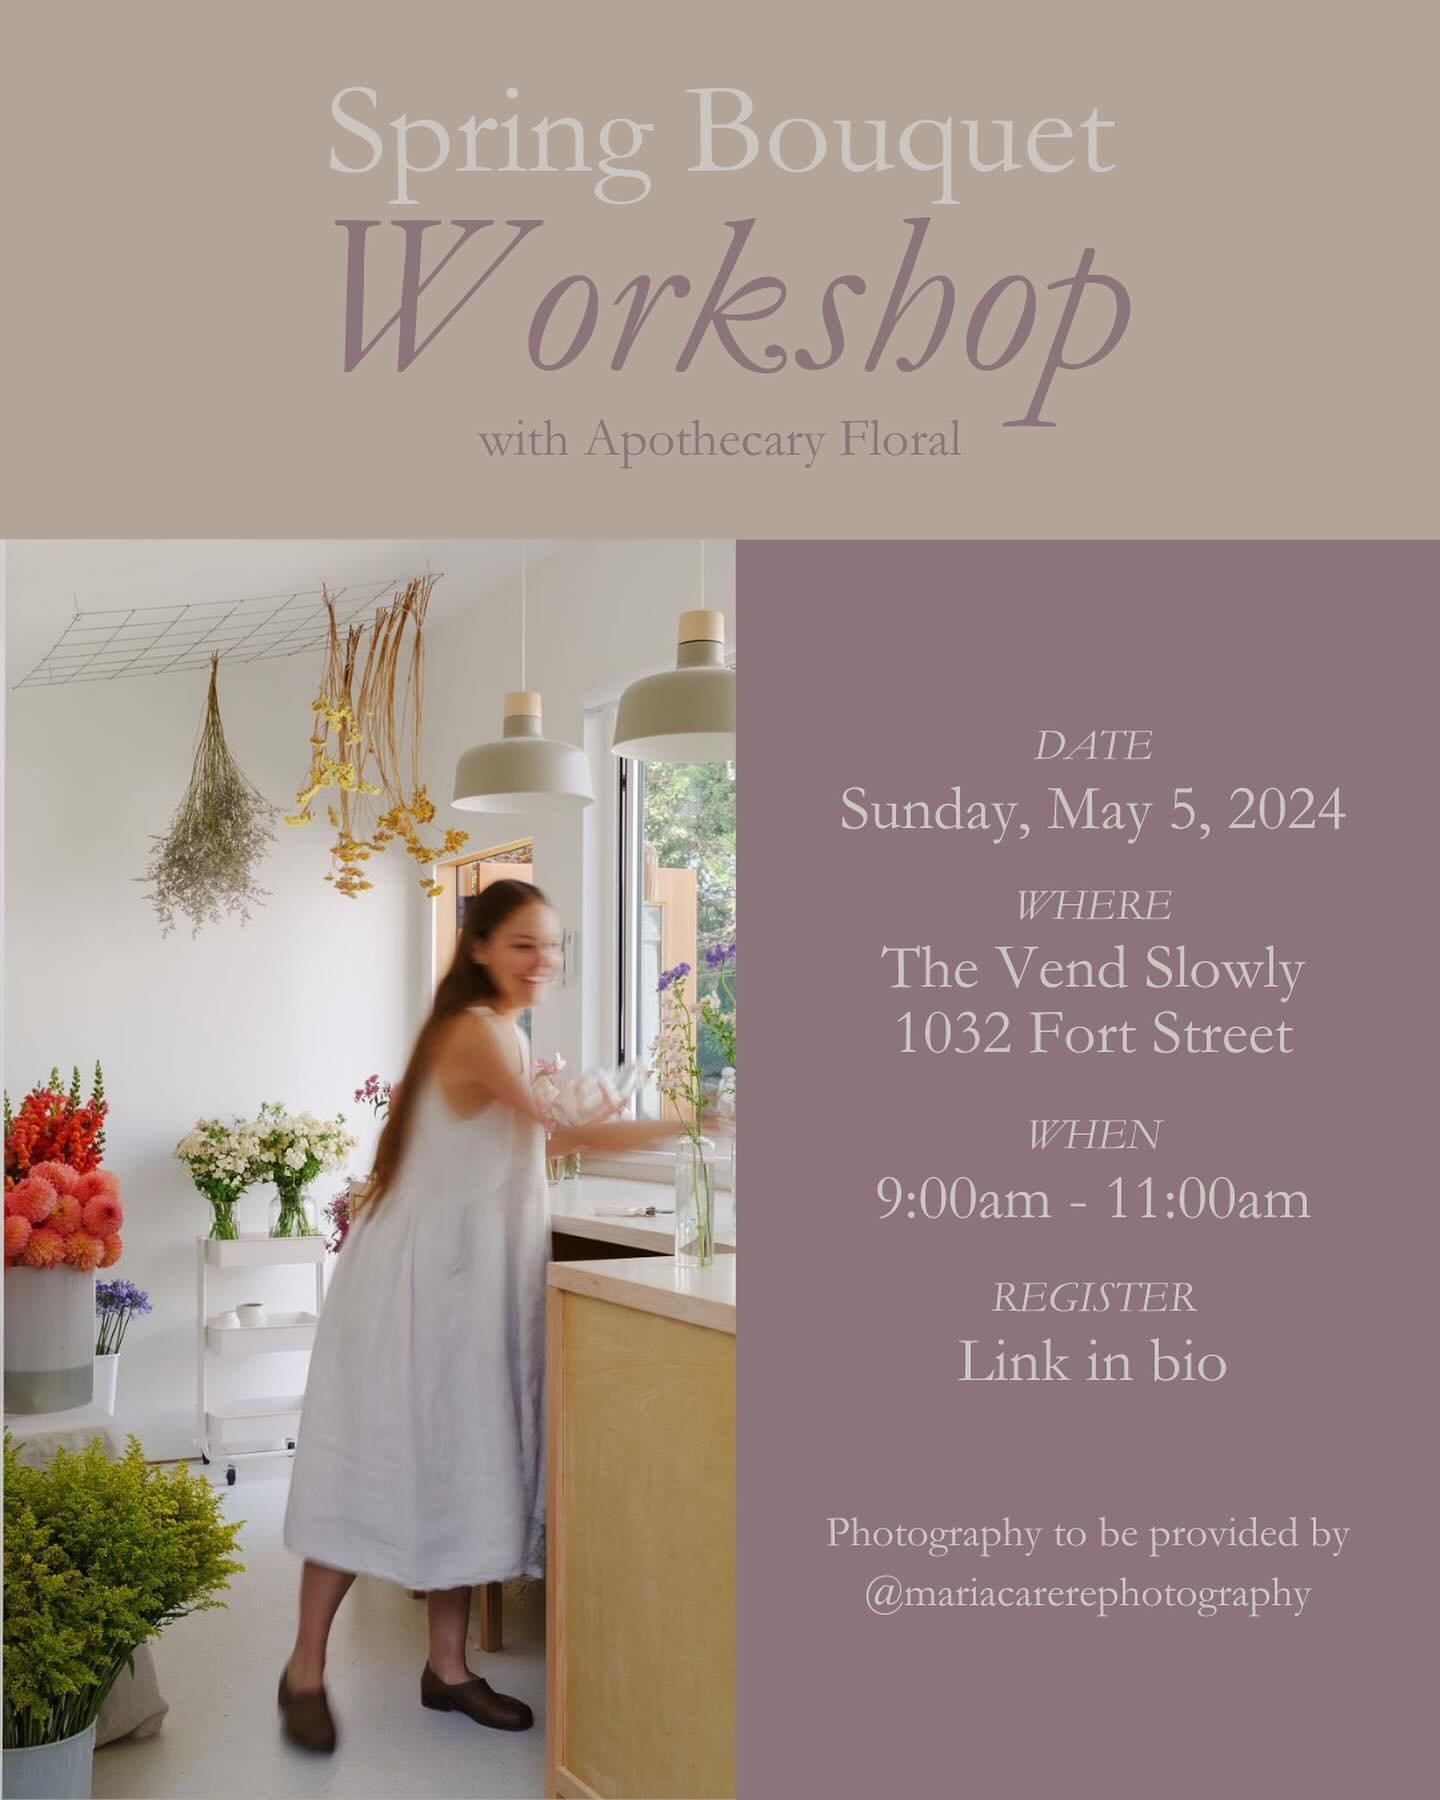 Let&rsquo;s go slowly 💐 Join me at @thevendslowly on Sunday, May 5th, and learn how to make a hand-tied bouquet. Register through the link in my bio!

#seasonalflowers #slowflowers #seasonalfloweralliance #victoriabc #vancouverisland #yyjlocal #yyjs